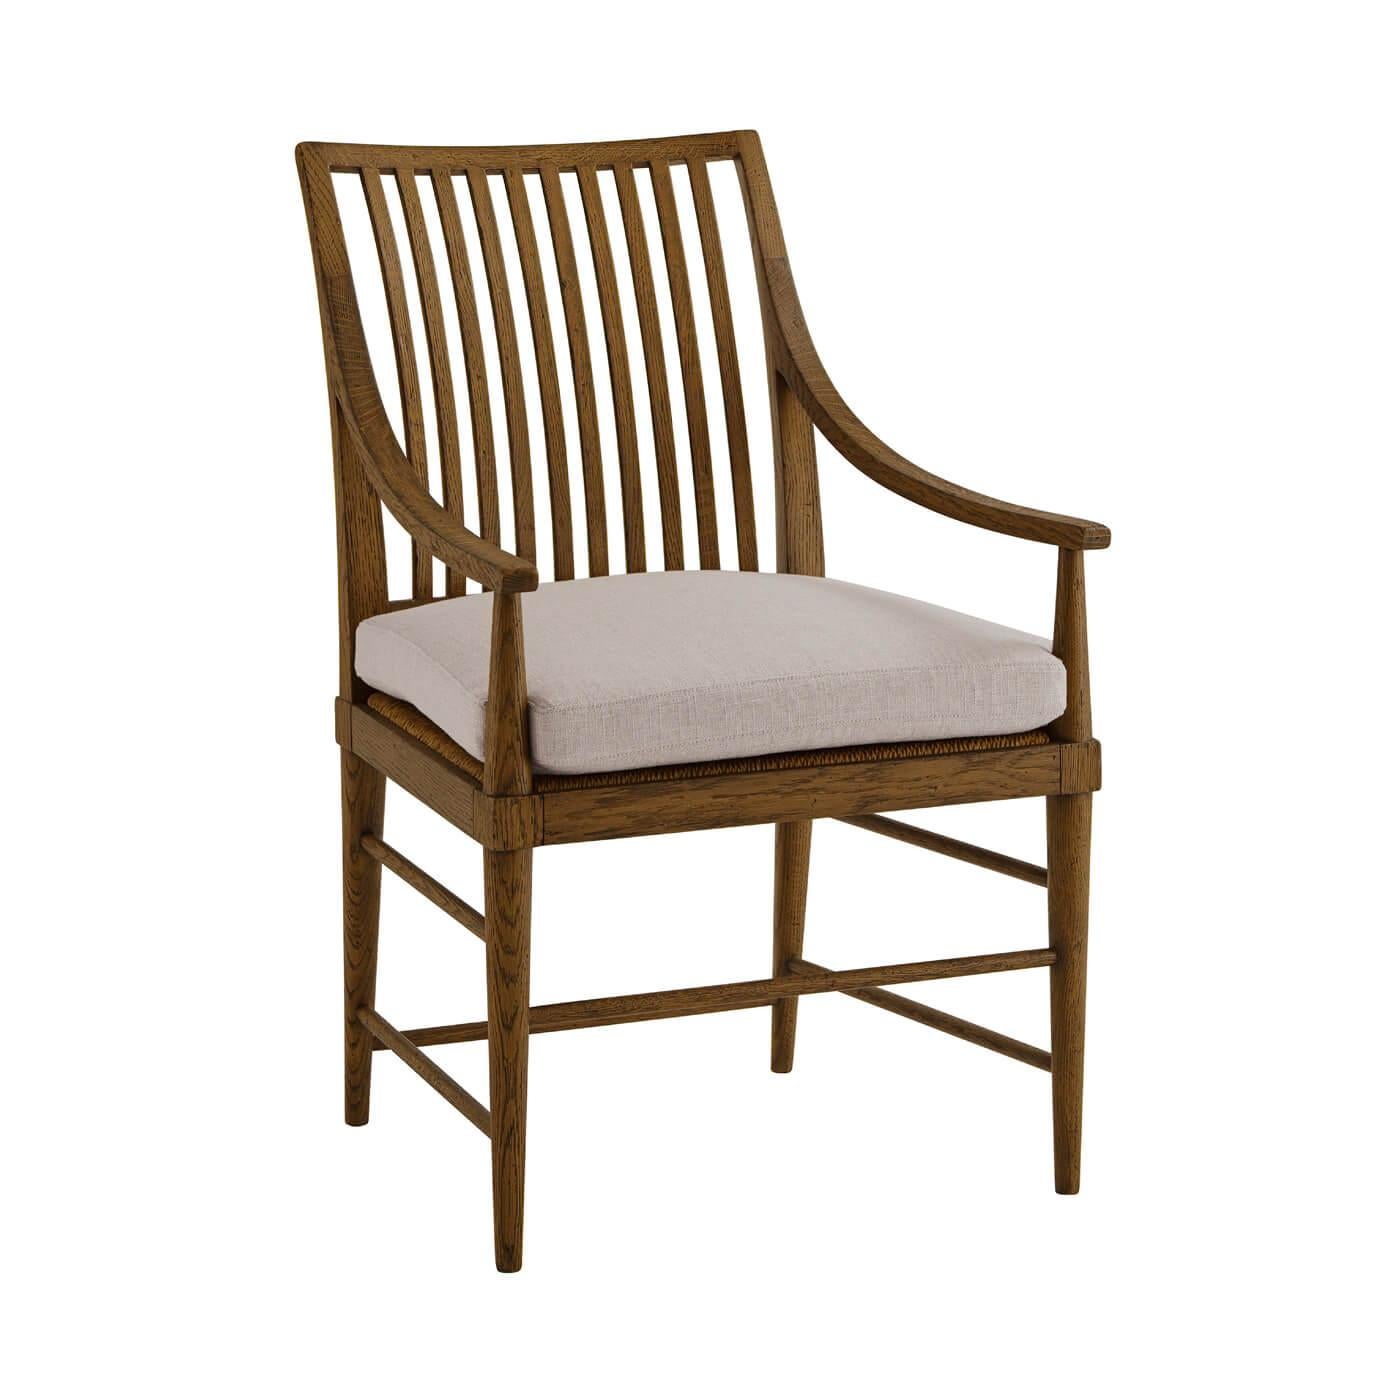 A Modern oak slat-back dining armchair with tapered oak legs. This beautiful chair is crafted with rustic oak and it has a slatted backrest, caned and loosely cushioned seat.

Shown in dusk finish.
Shown in linen-UP5409 fabric.
Dimensions:
23